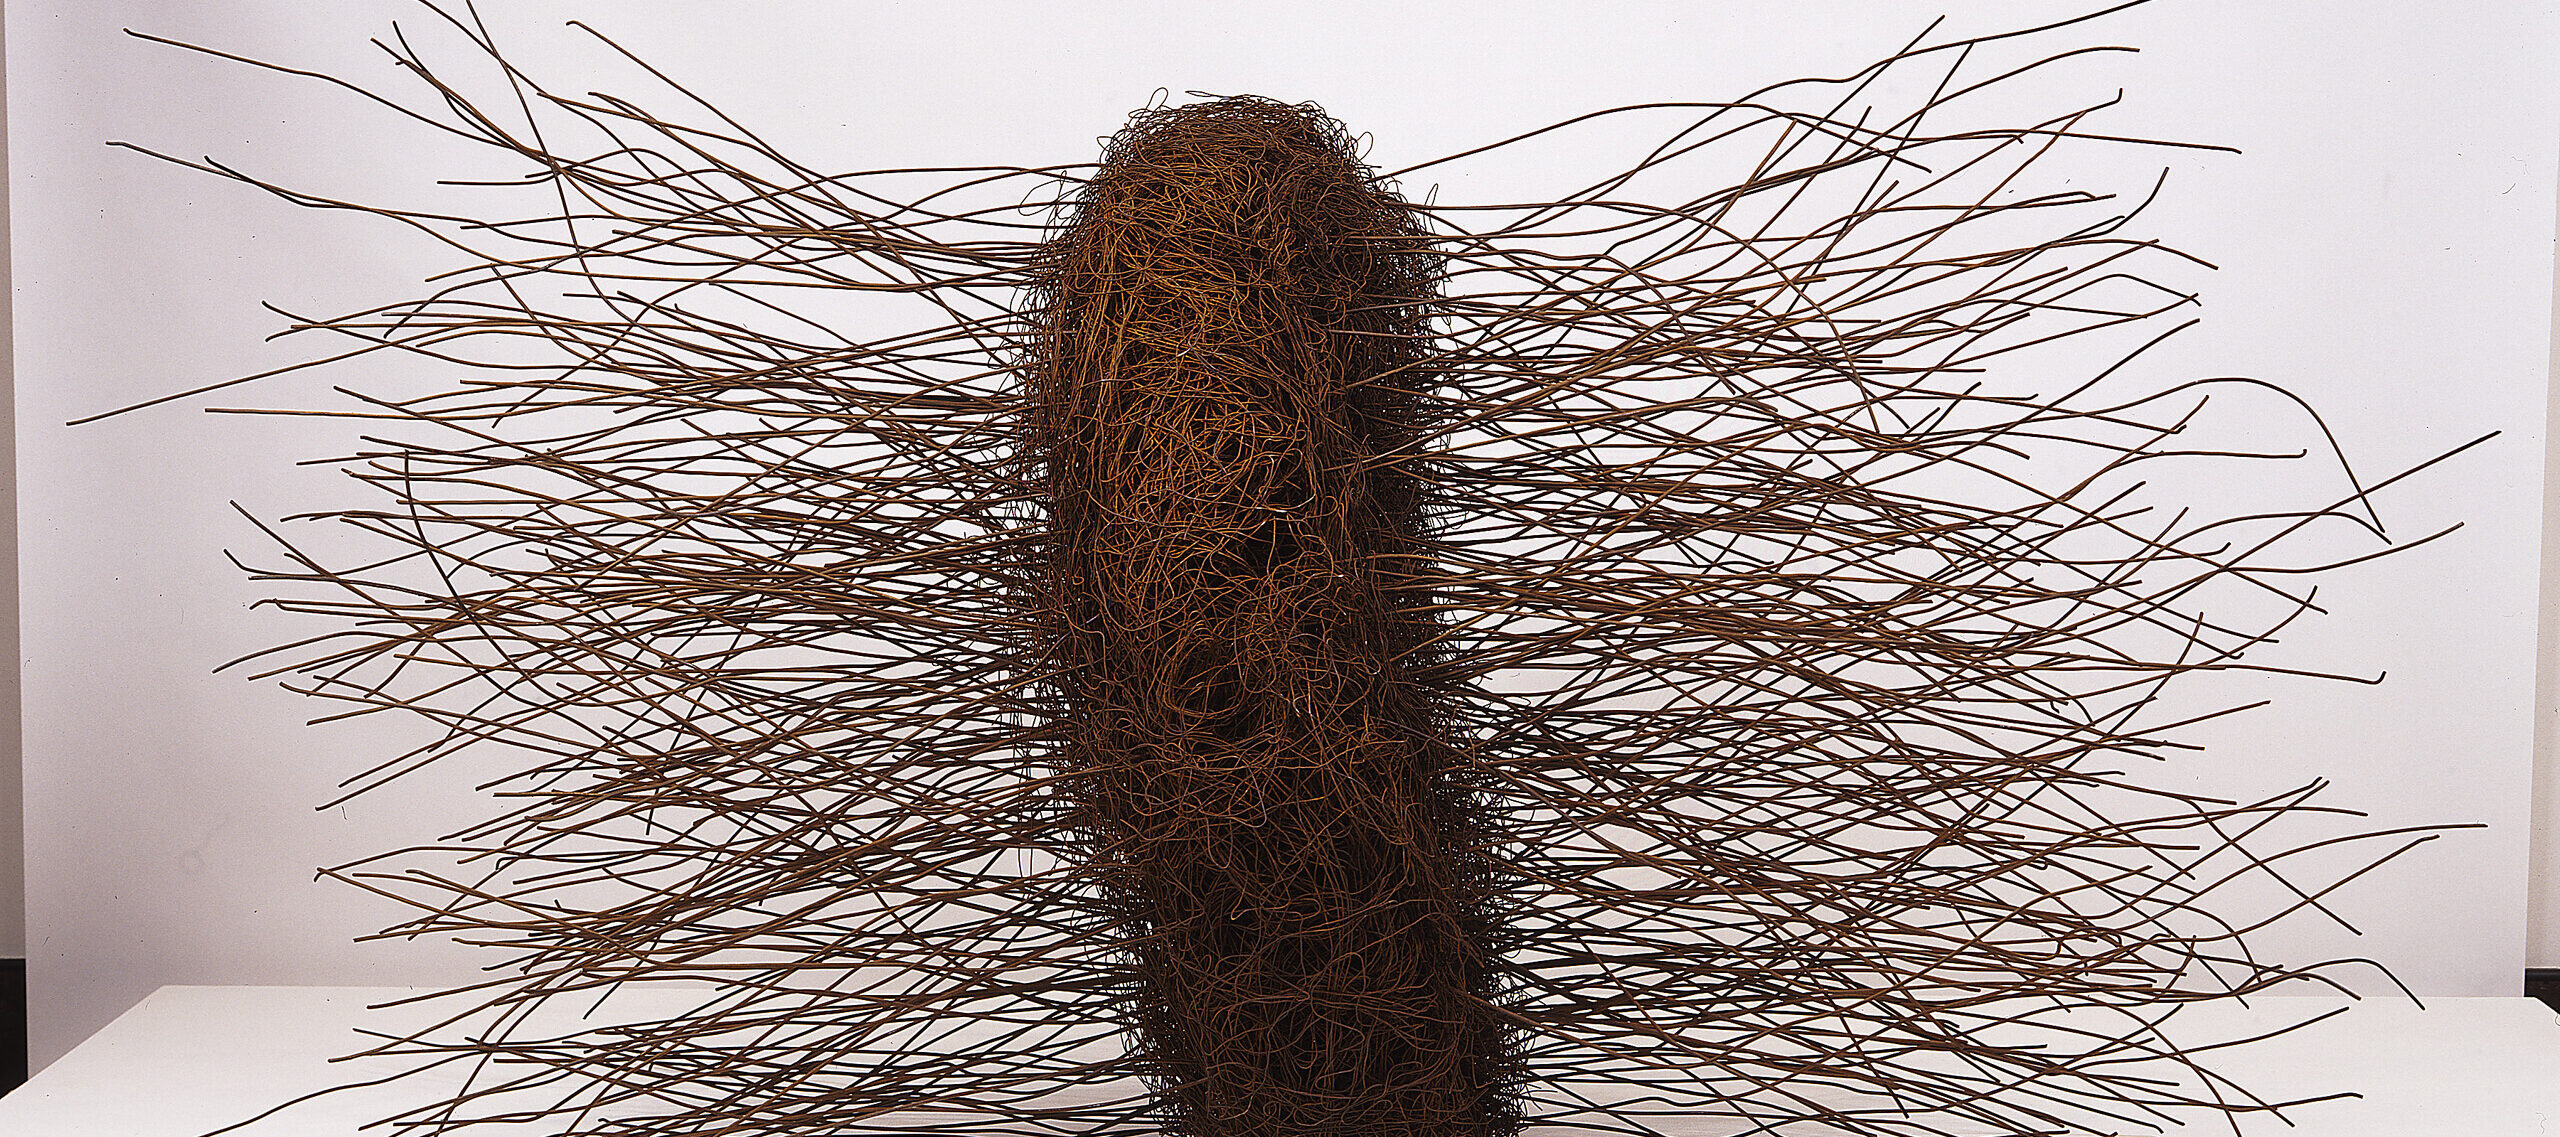 Large, abstract sculpture, fabricated of rusted iron wires, conveys an organic form. At center is a mass of thin, tangled wires shaped into a thick disc, sitting on edge. From either side of the center disc a mass of slightly bent, thicker wires juts straight out.